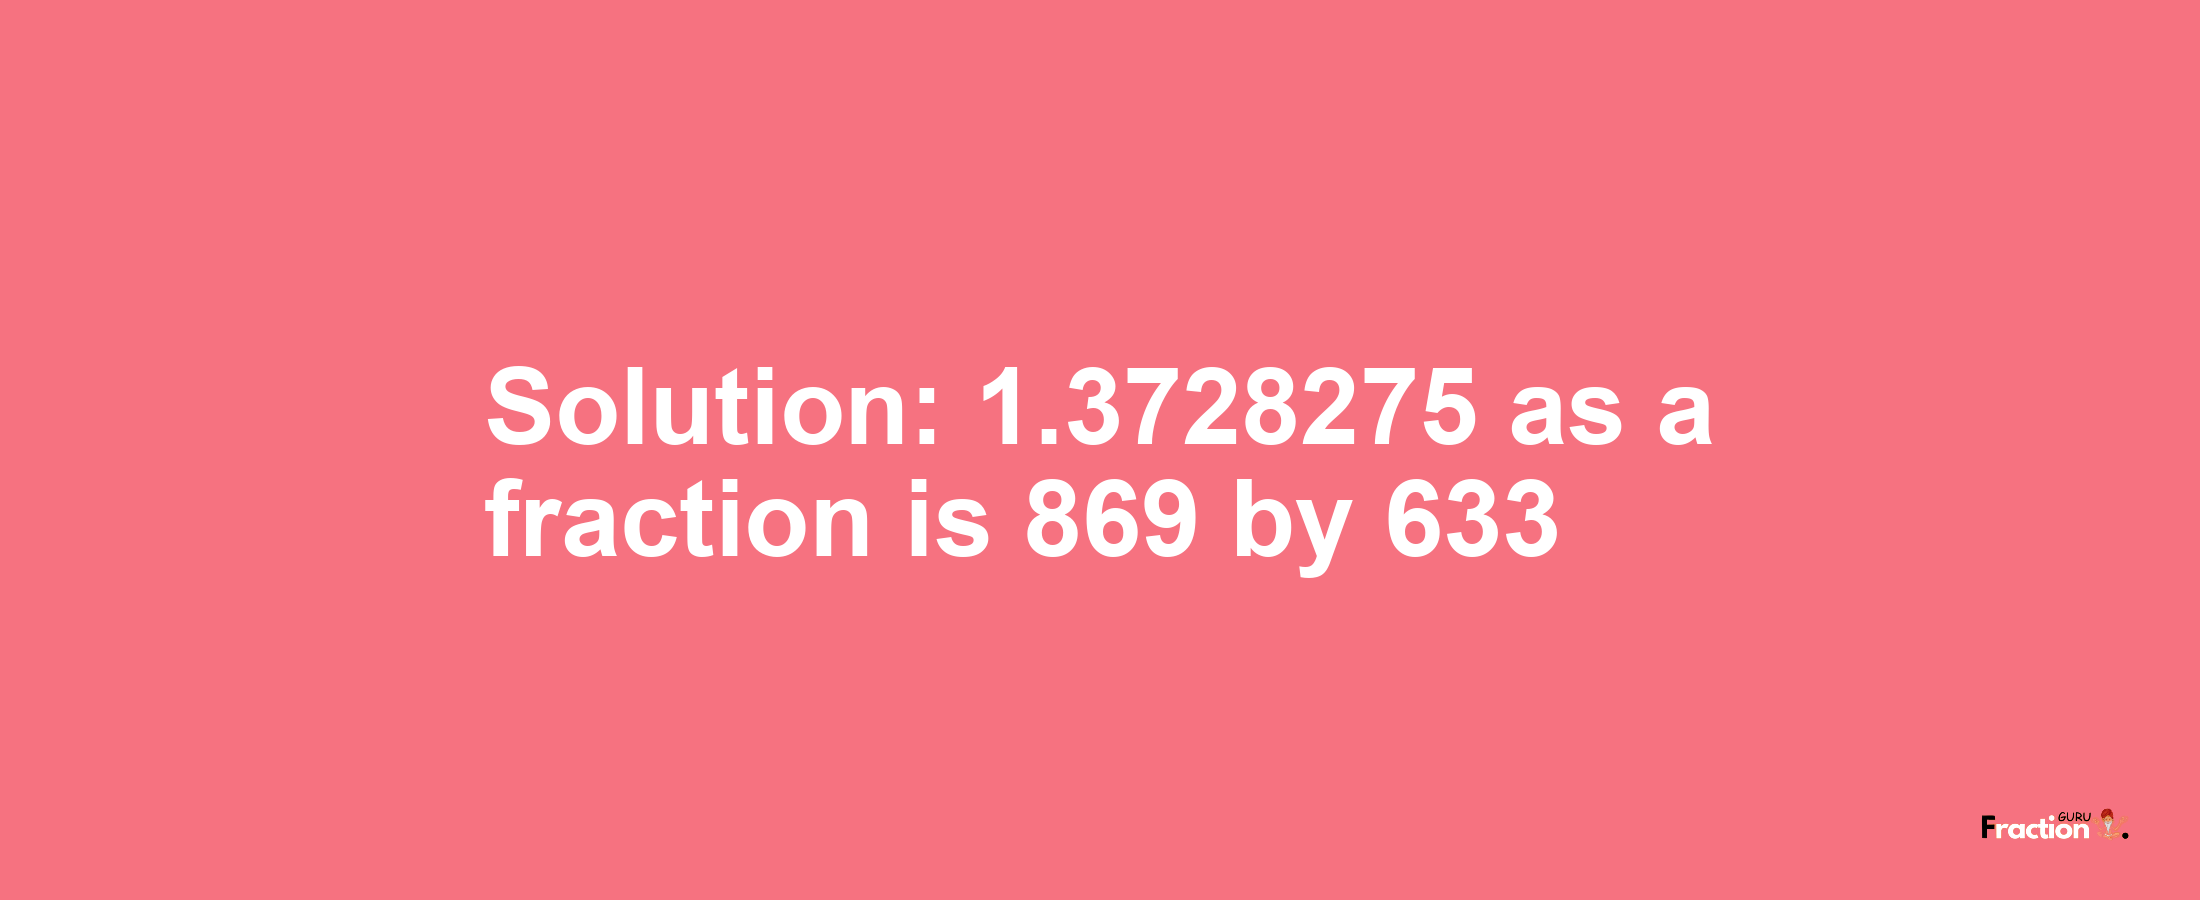 Solution:1.3728275 as a fraction is 869/633